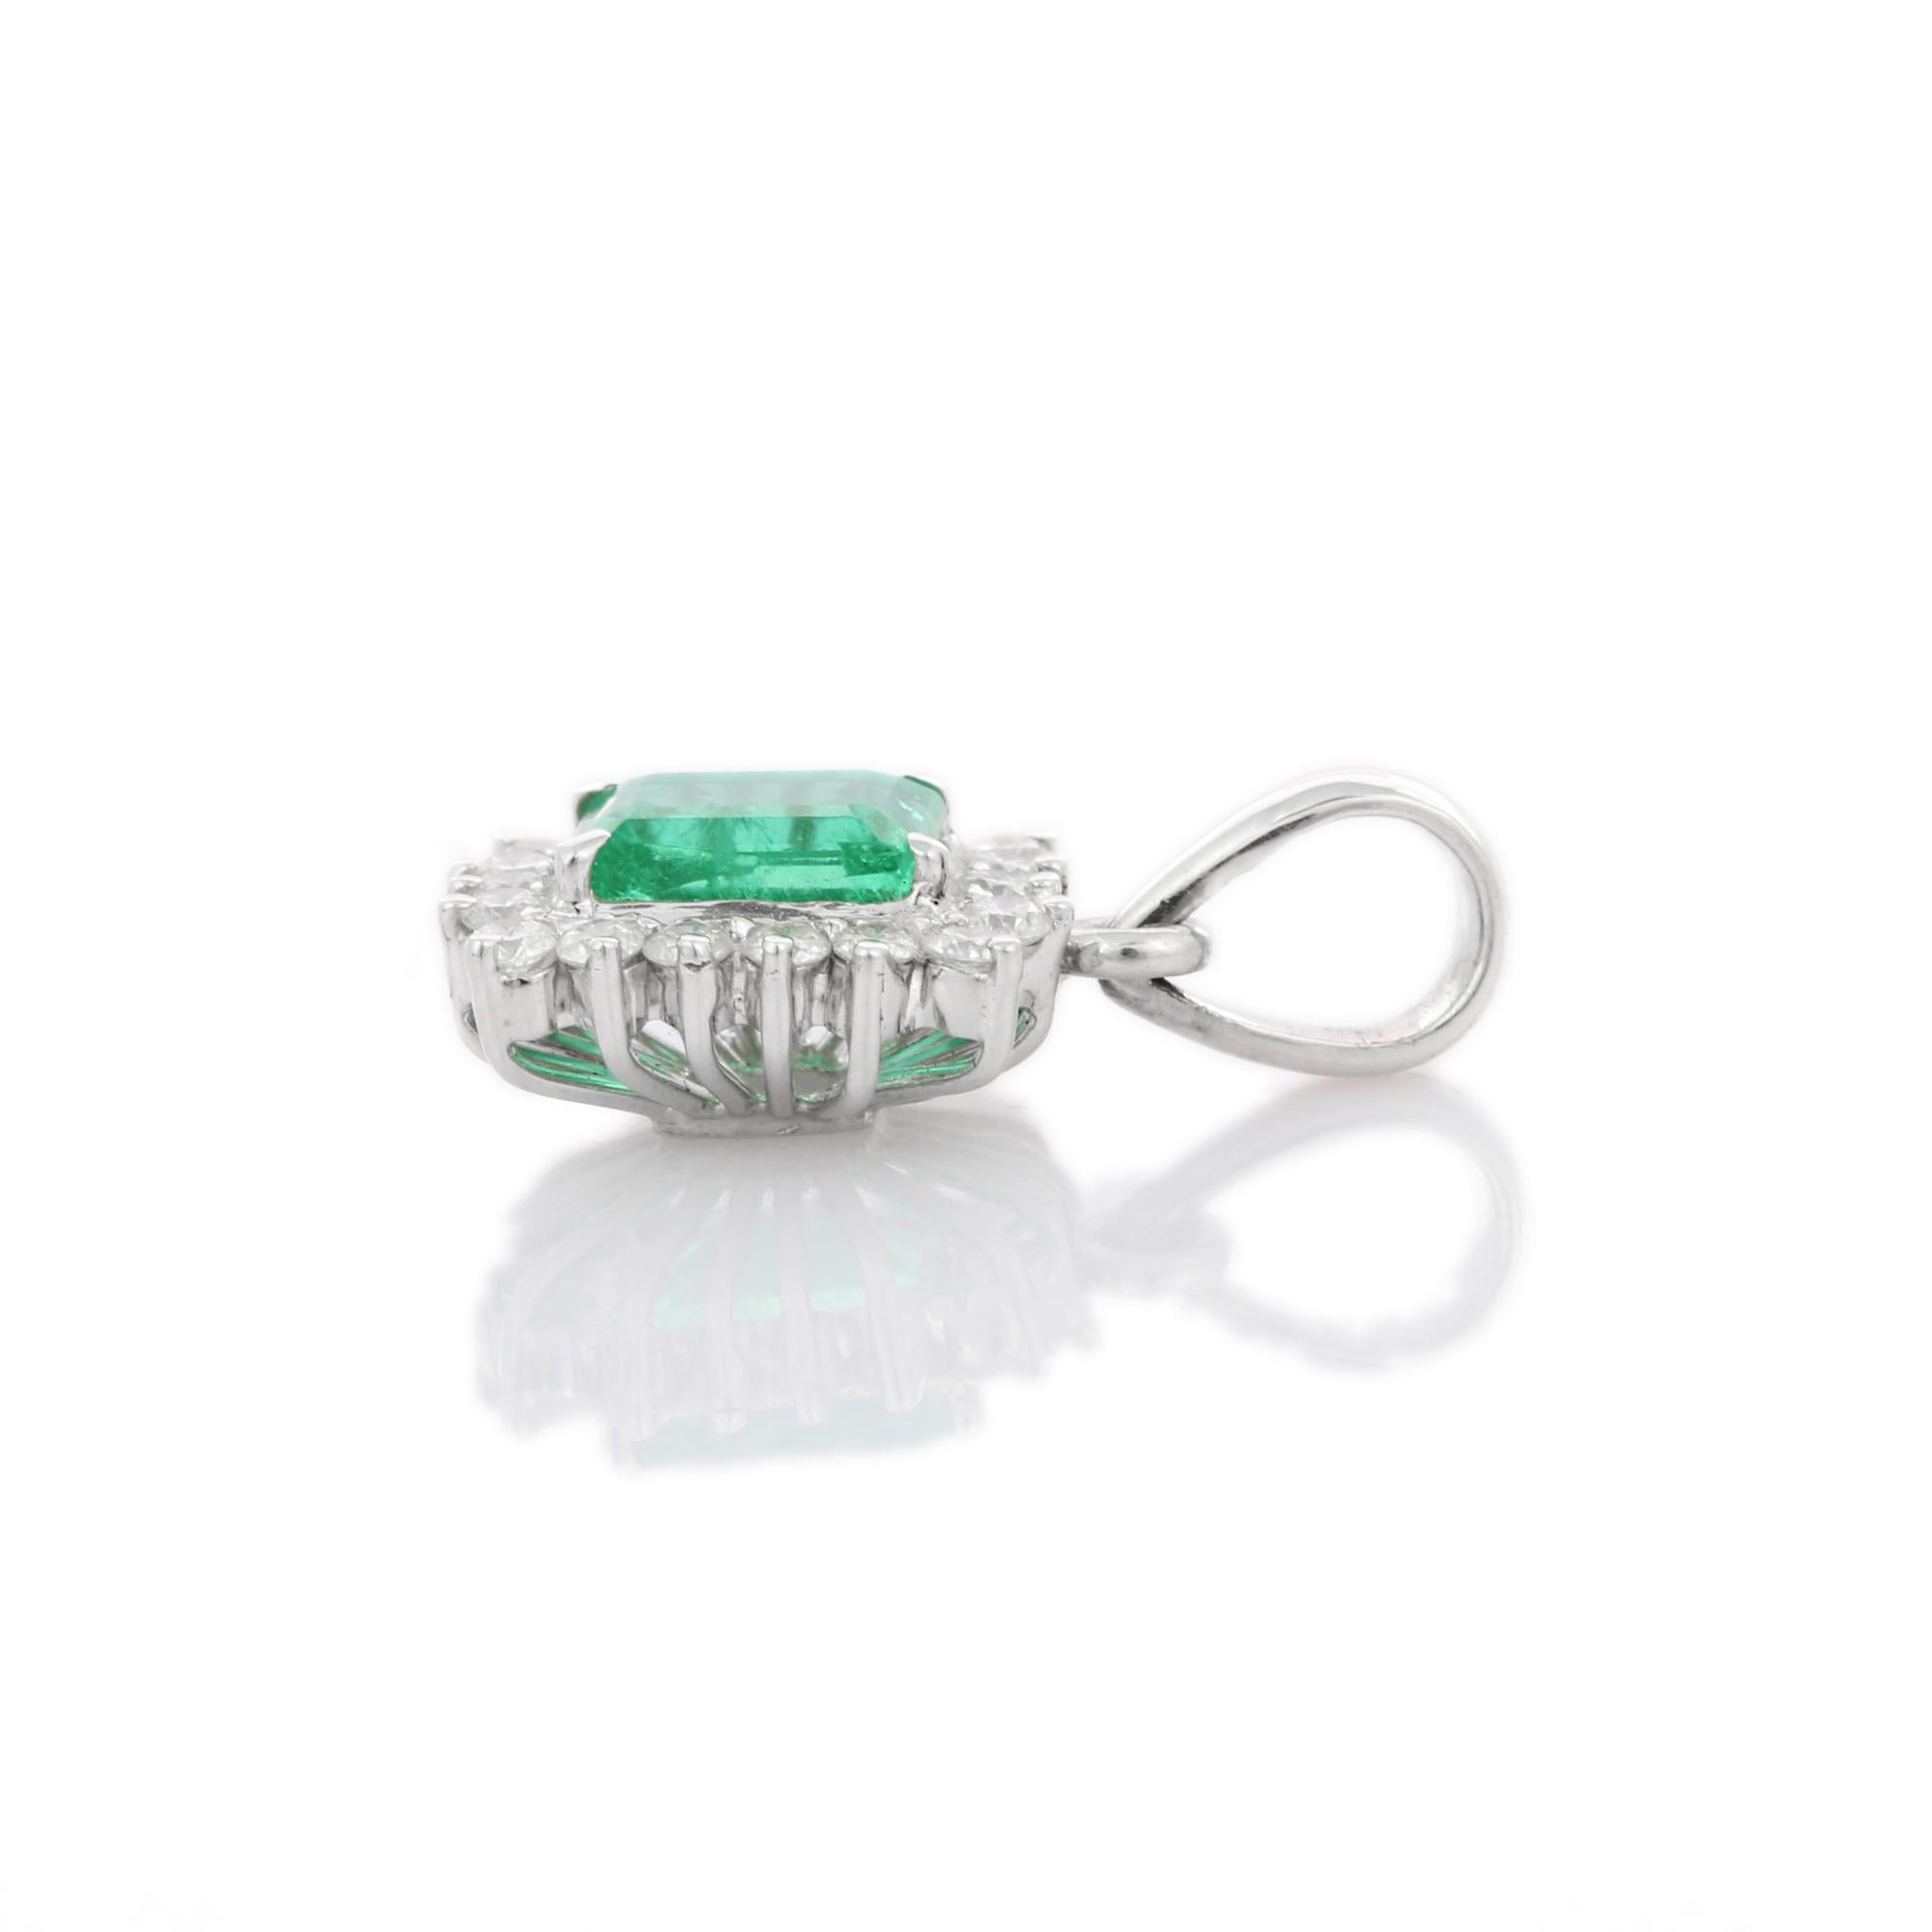 Natural Emerald pendant in 18K Gold. It has a octagon cut emerald studded with diamonds that completes your look with a decent touch. Pendants are used to wear or gifted to represent love and promises. It's an attractive jewelry piece that goes with